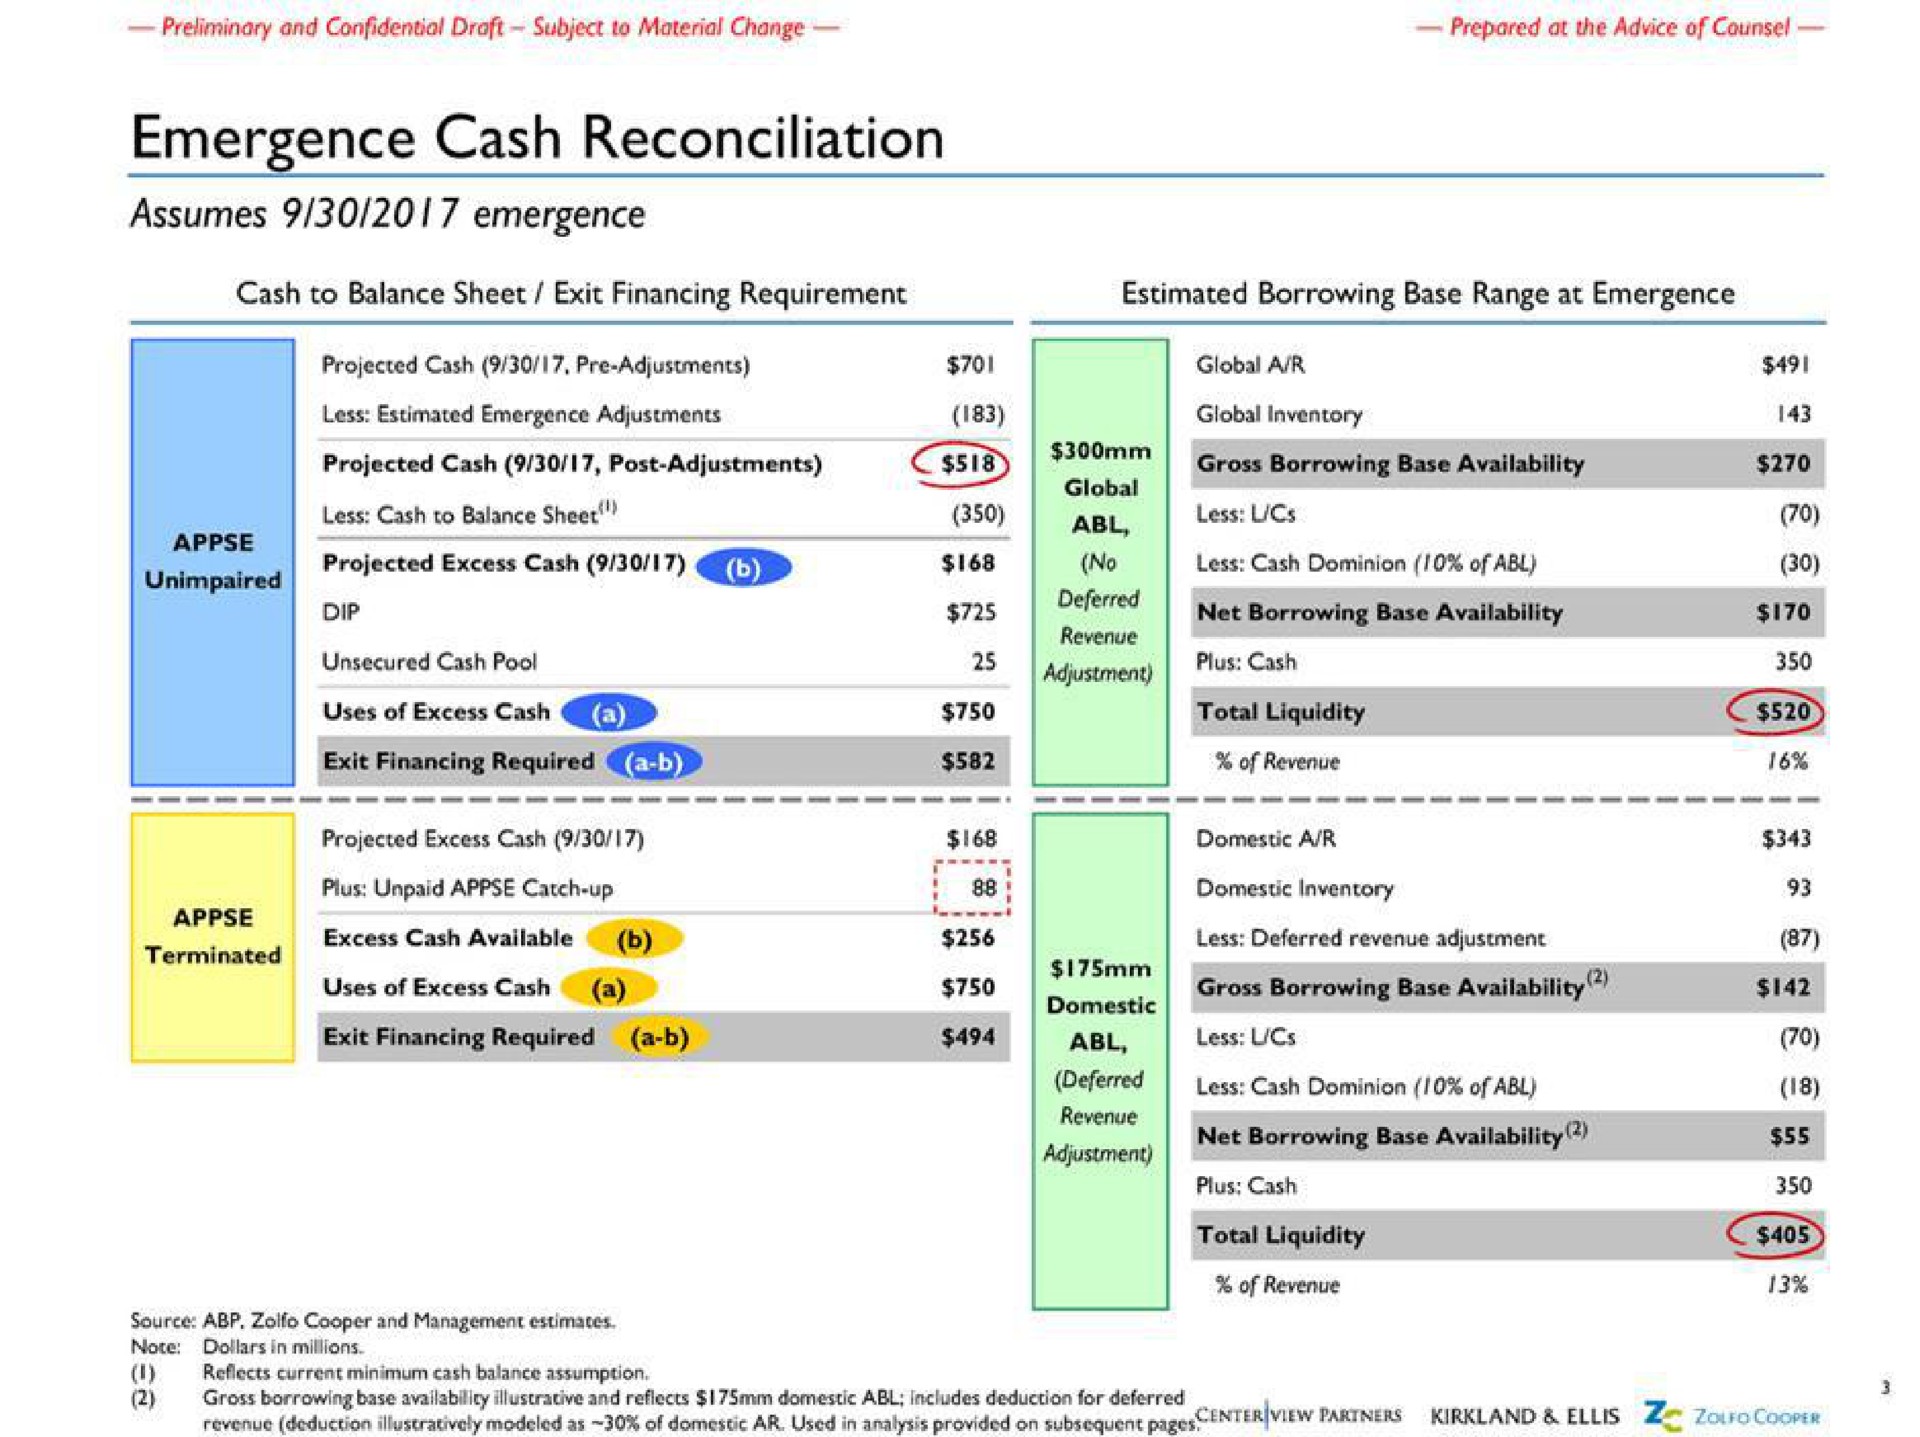 emergence cash reconciliation assumes emergence uses of excess cash exit financing required uses of excess cash a total liquidity of revenue gross borrowing base availability total | Centerview Partners